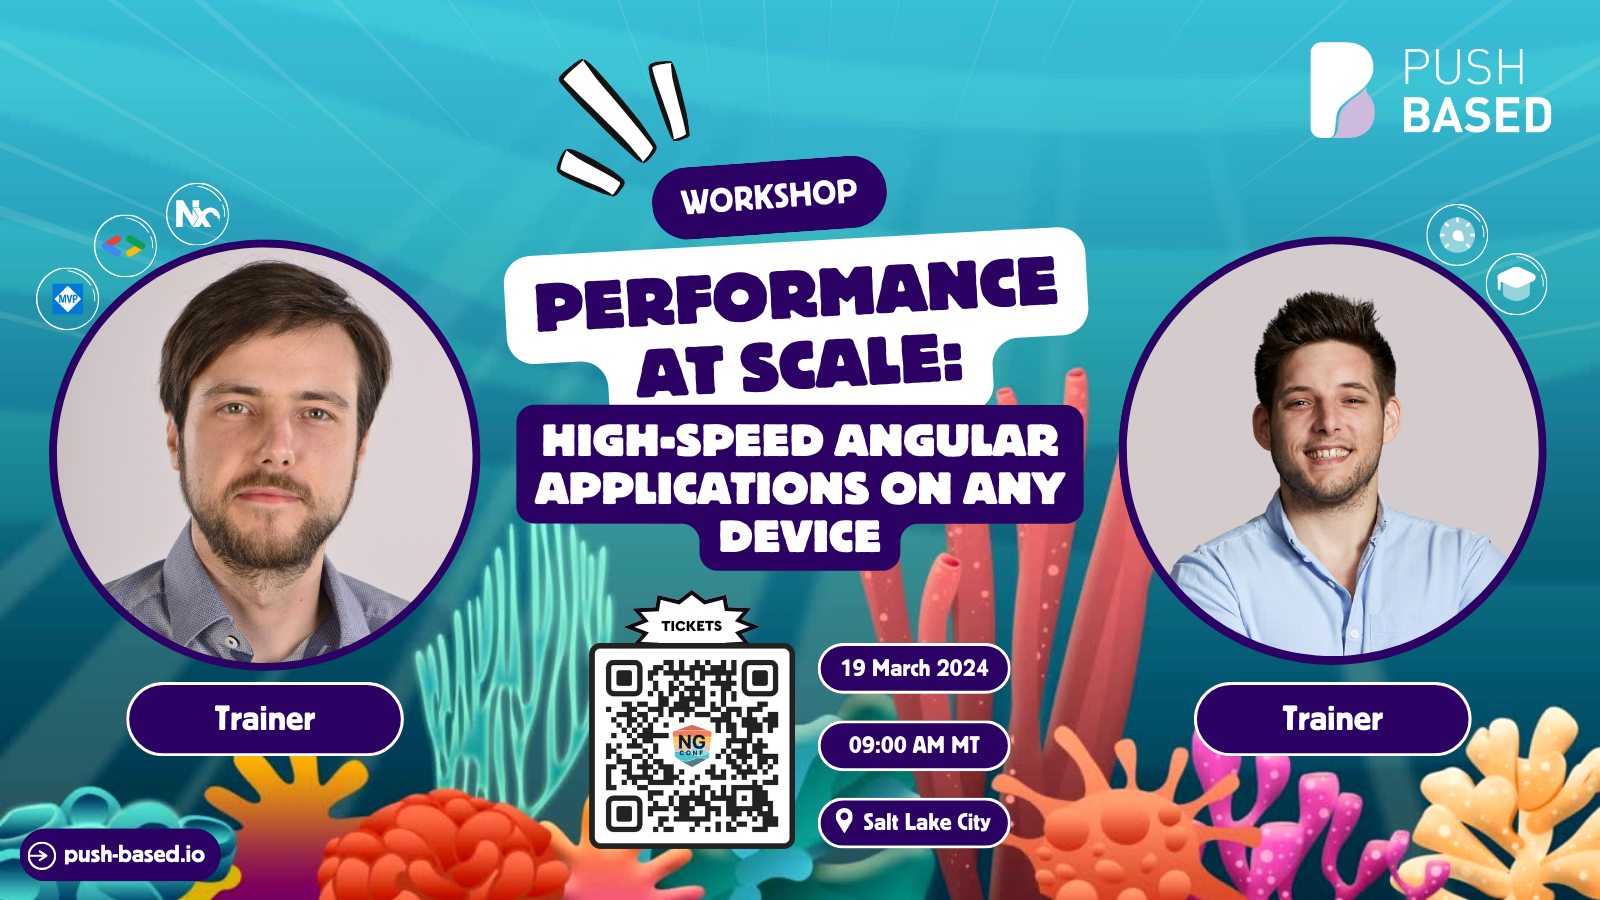 Performance at Scale: High-Speed Angular Applications On Any Device. Poster.